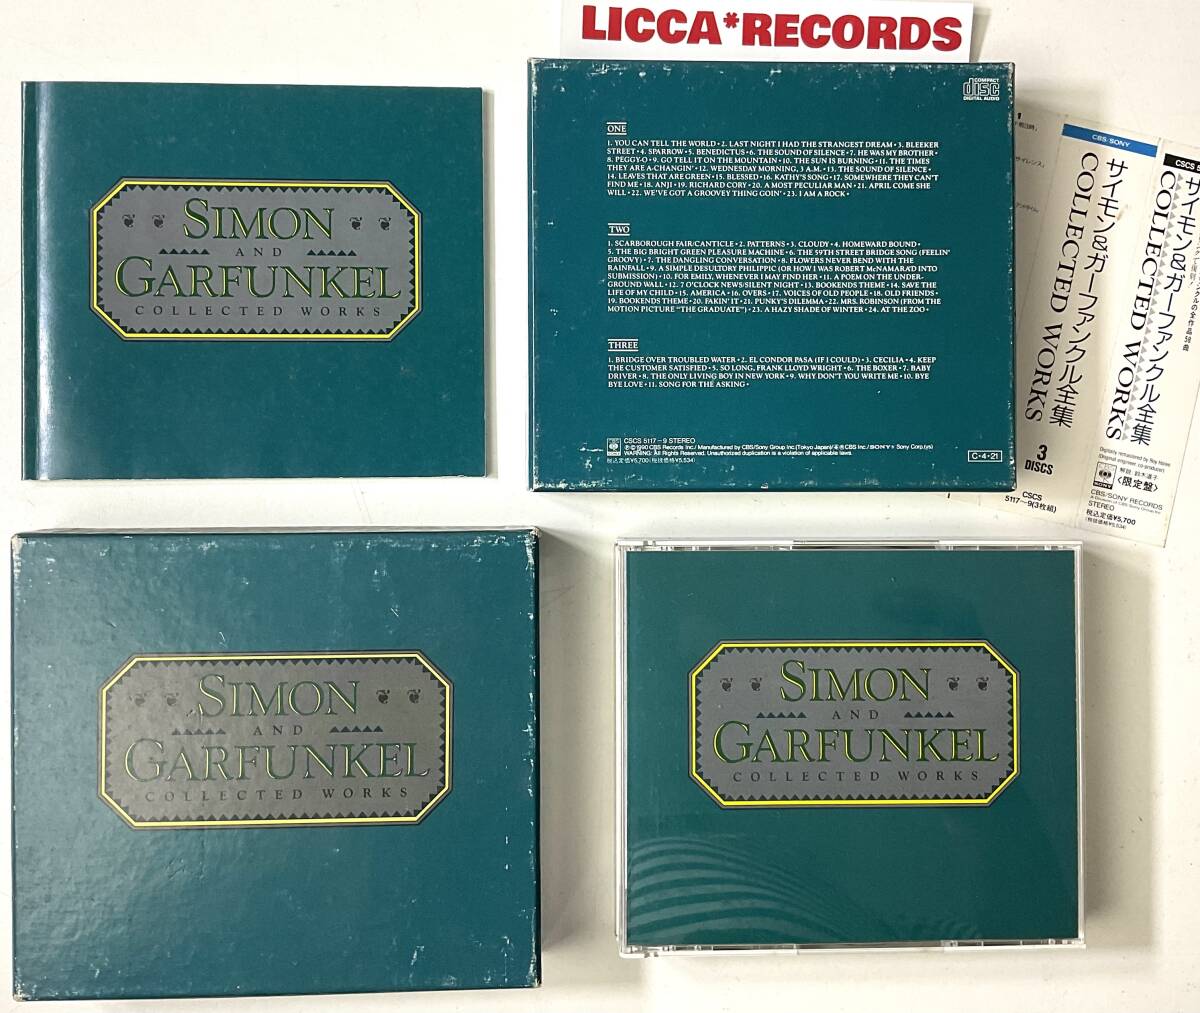 DIGITALLY REMASTERED LIMITED EDITION 3xCD Simon & Garfunkel - Collected Works BOX SET w/OBI BOOKLET JP 1990 LICCA*RECORDS 574 RARE_画像2